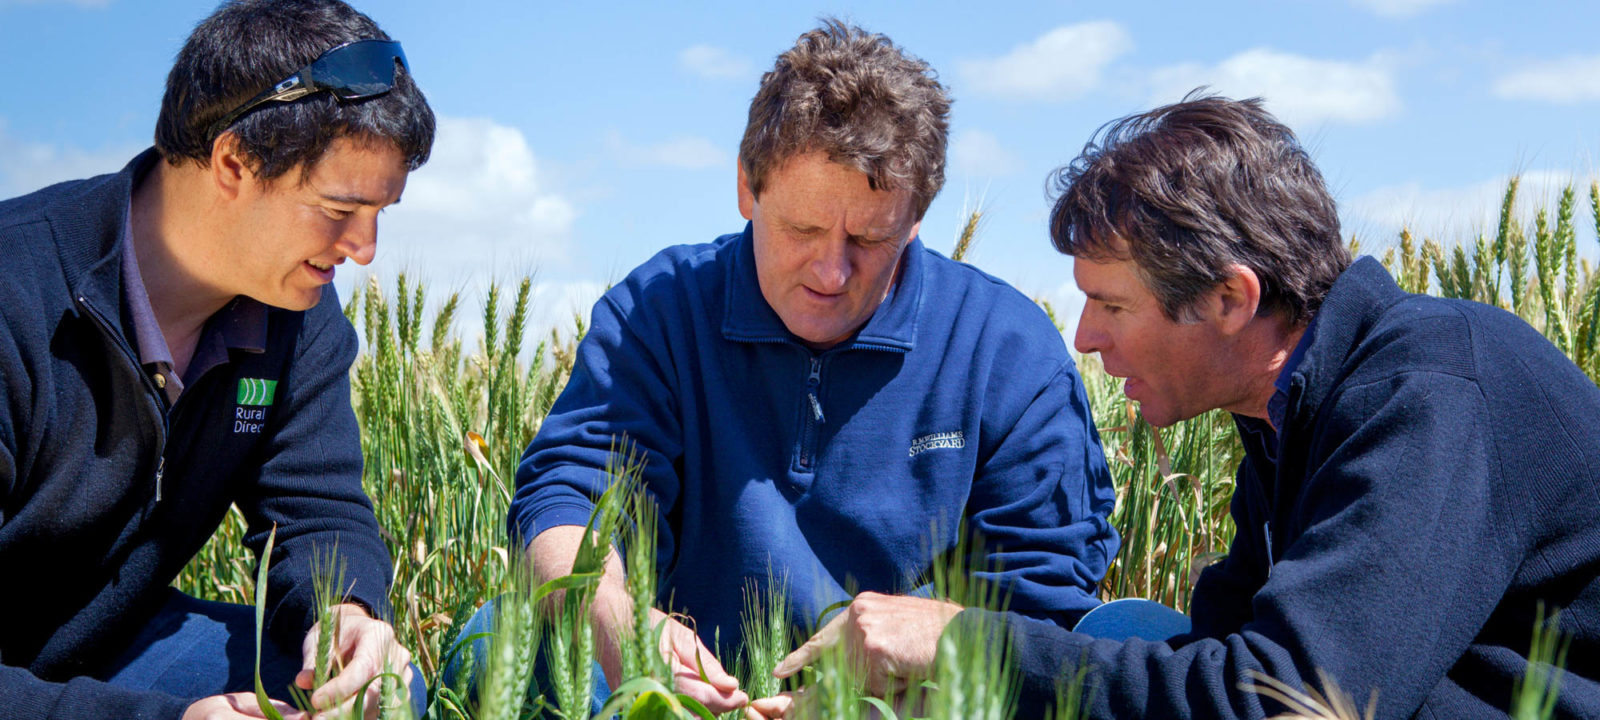 UK exchange employee to learn from South Australian agriculture - The ...